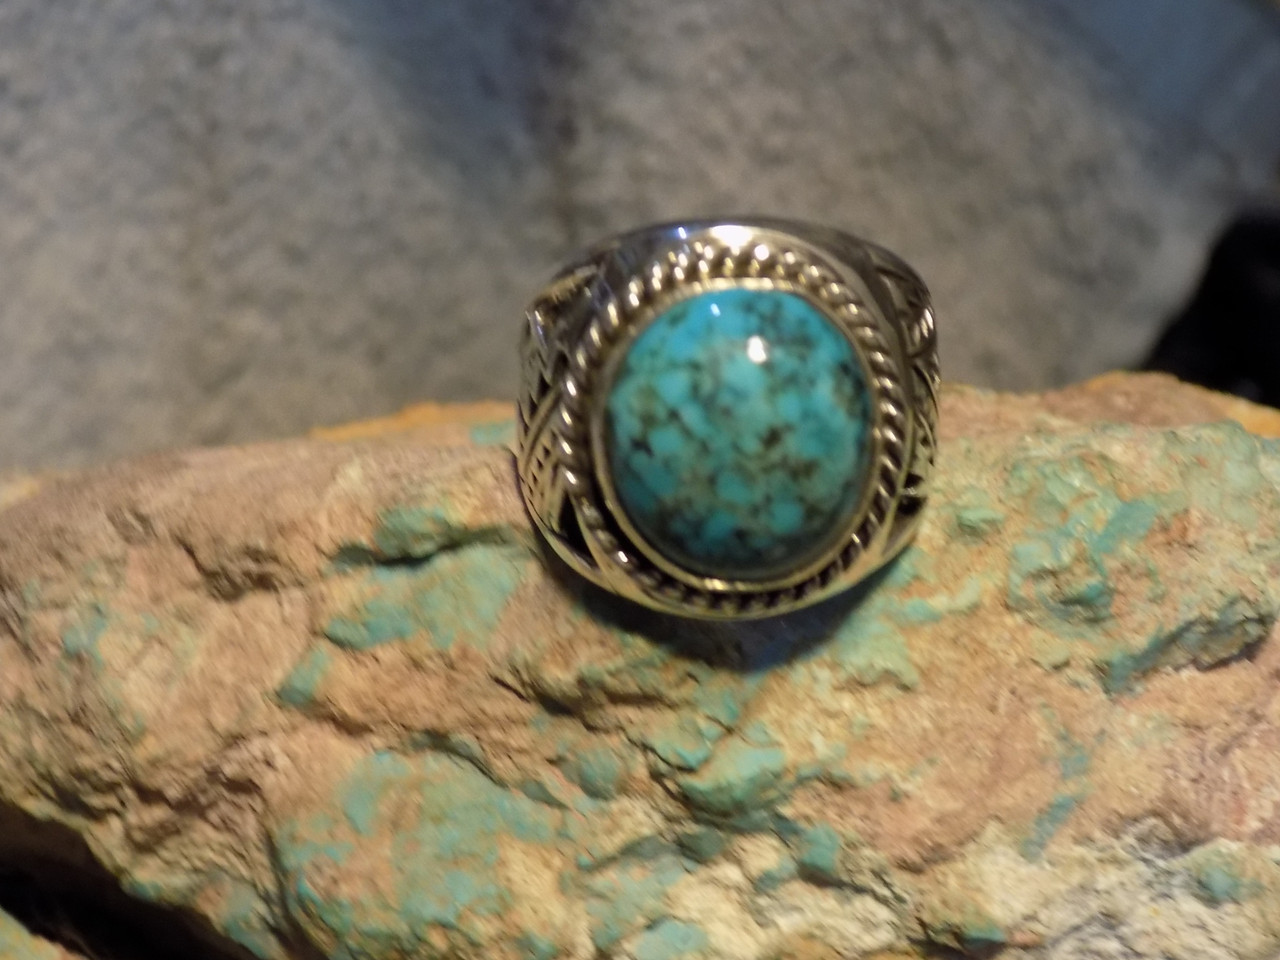 Mens Jewelry 316l stainless steel Oval blue turquoise men ring stone Size  7-15 | eBay